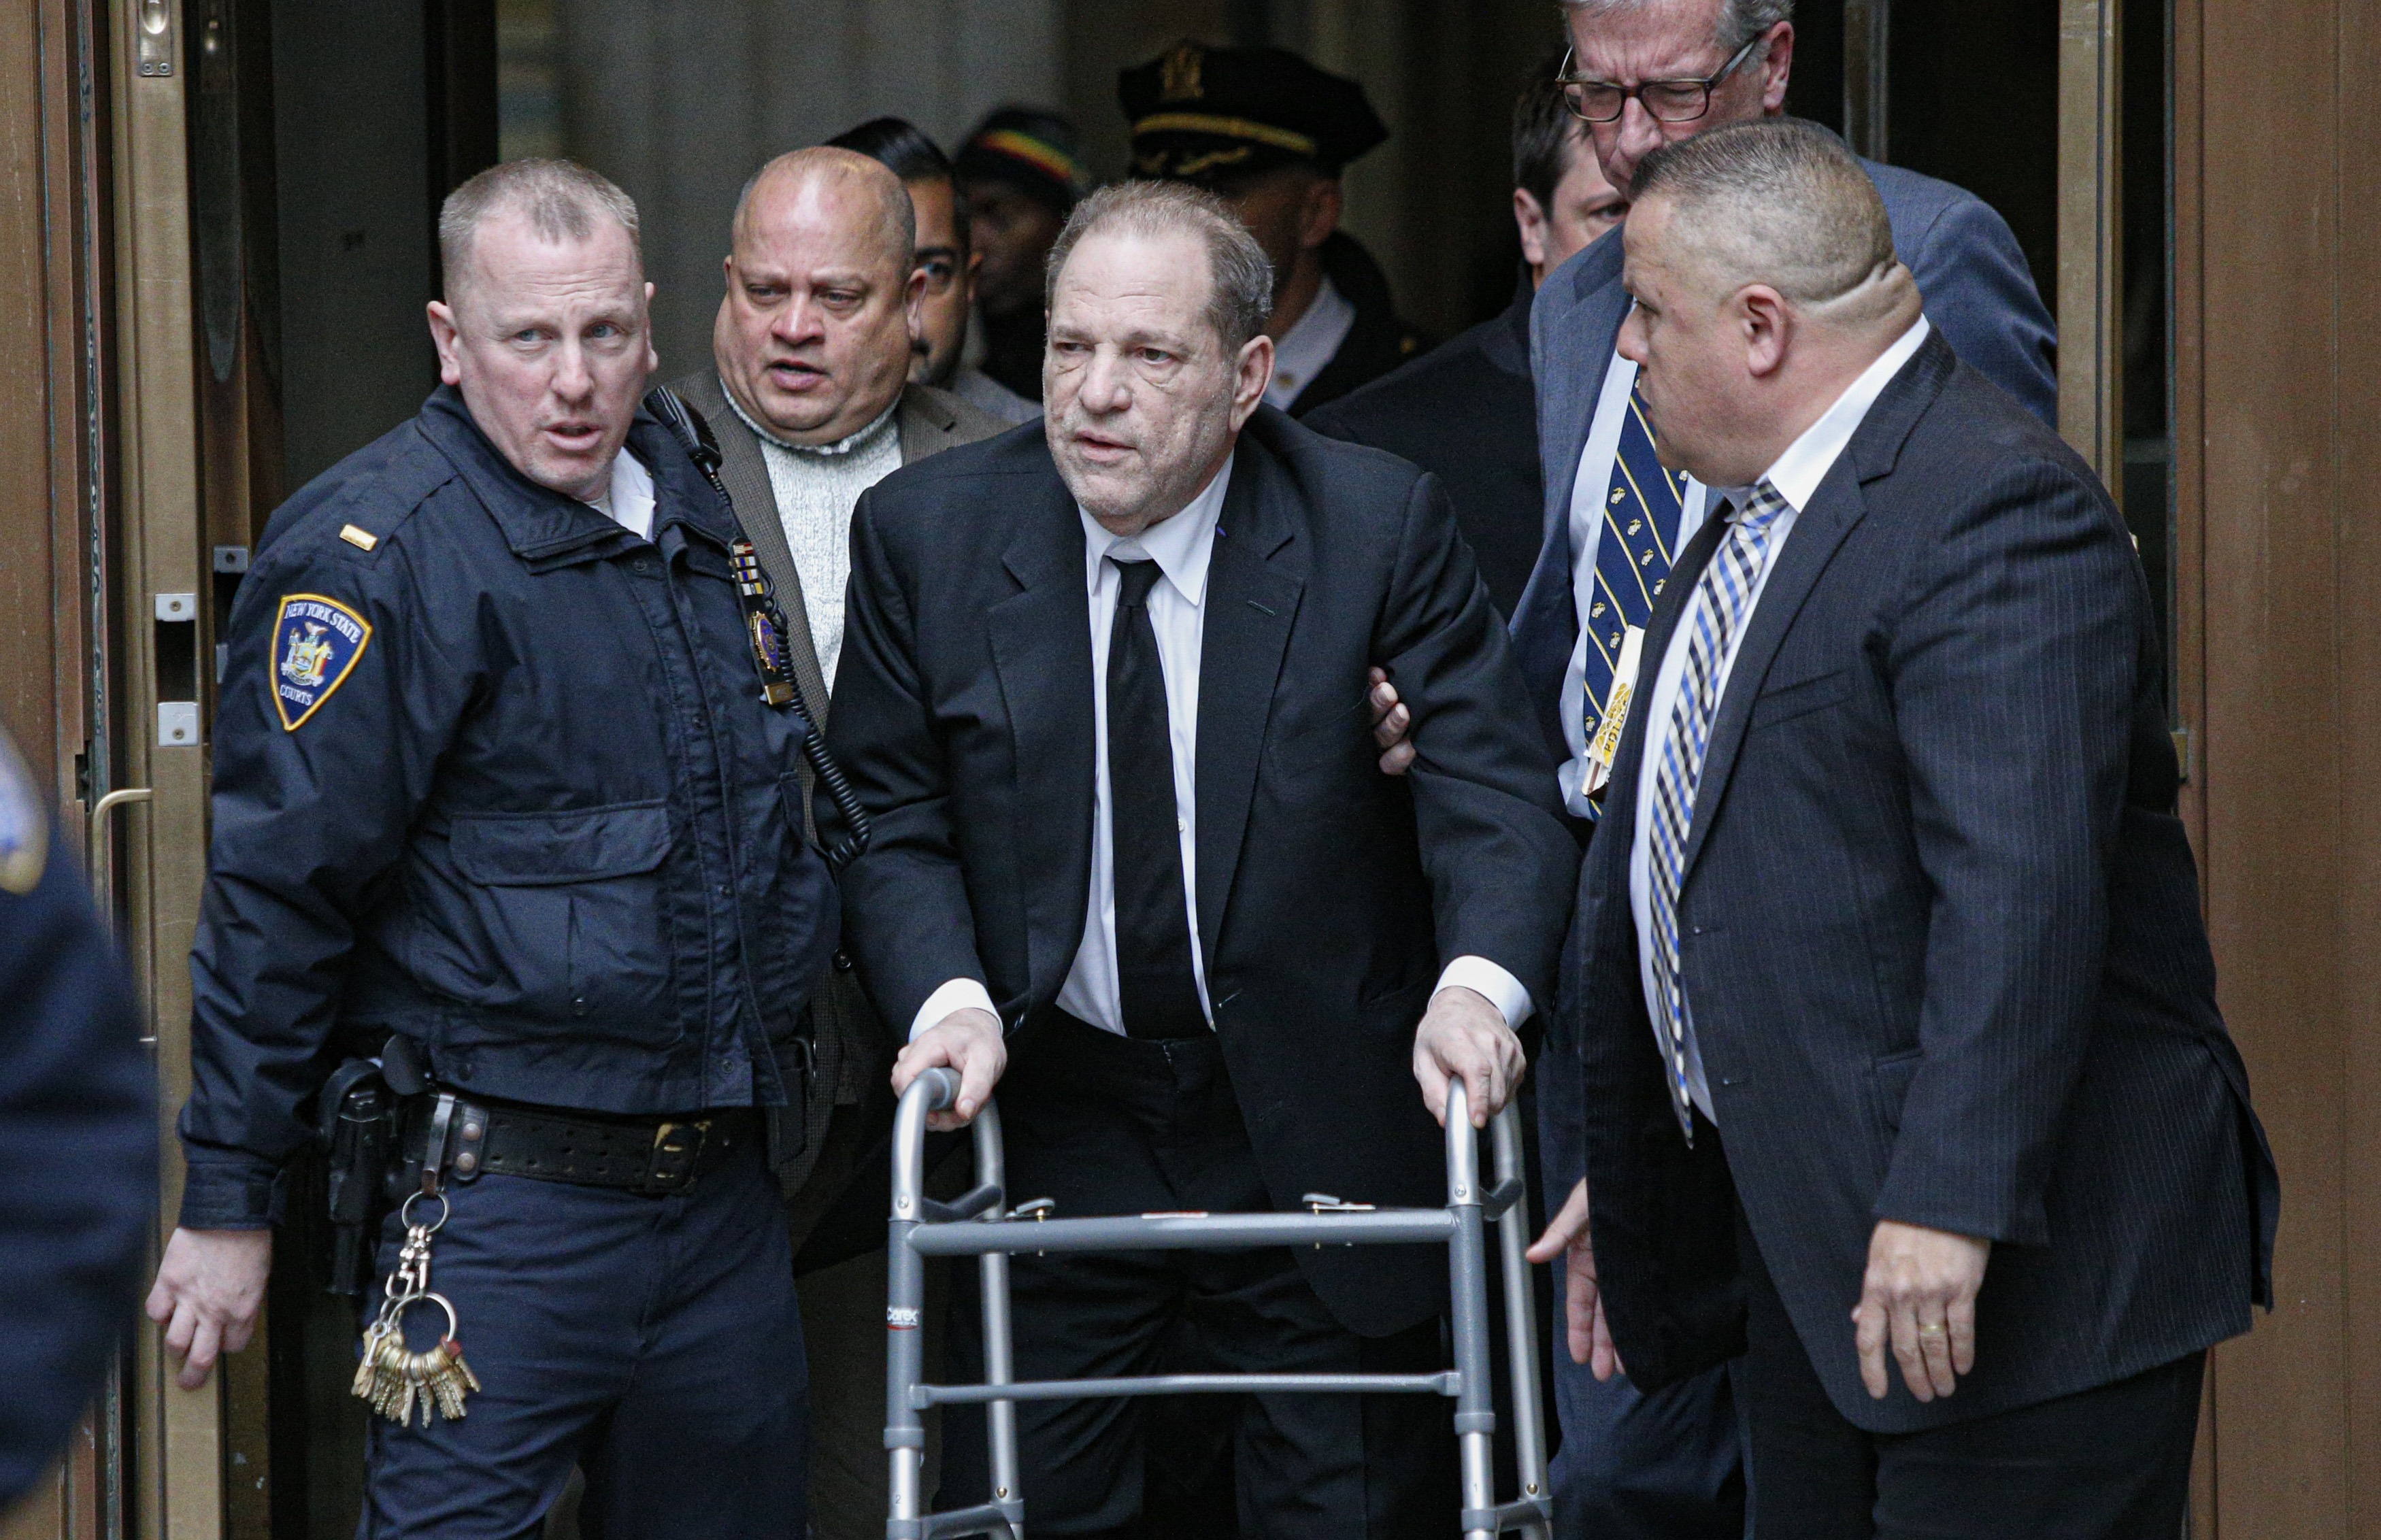 Harvey Weinstein leaves from the court on January 6, 2020 in New York City. | Source: Getty Images